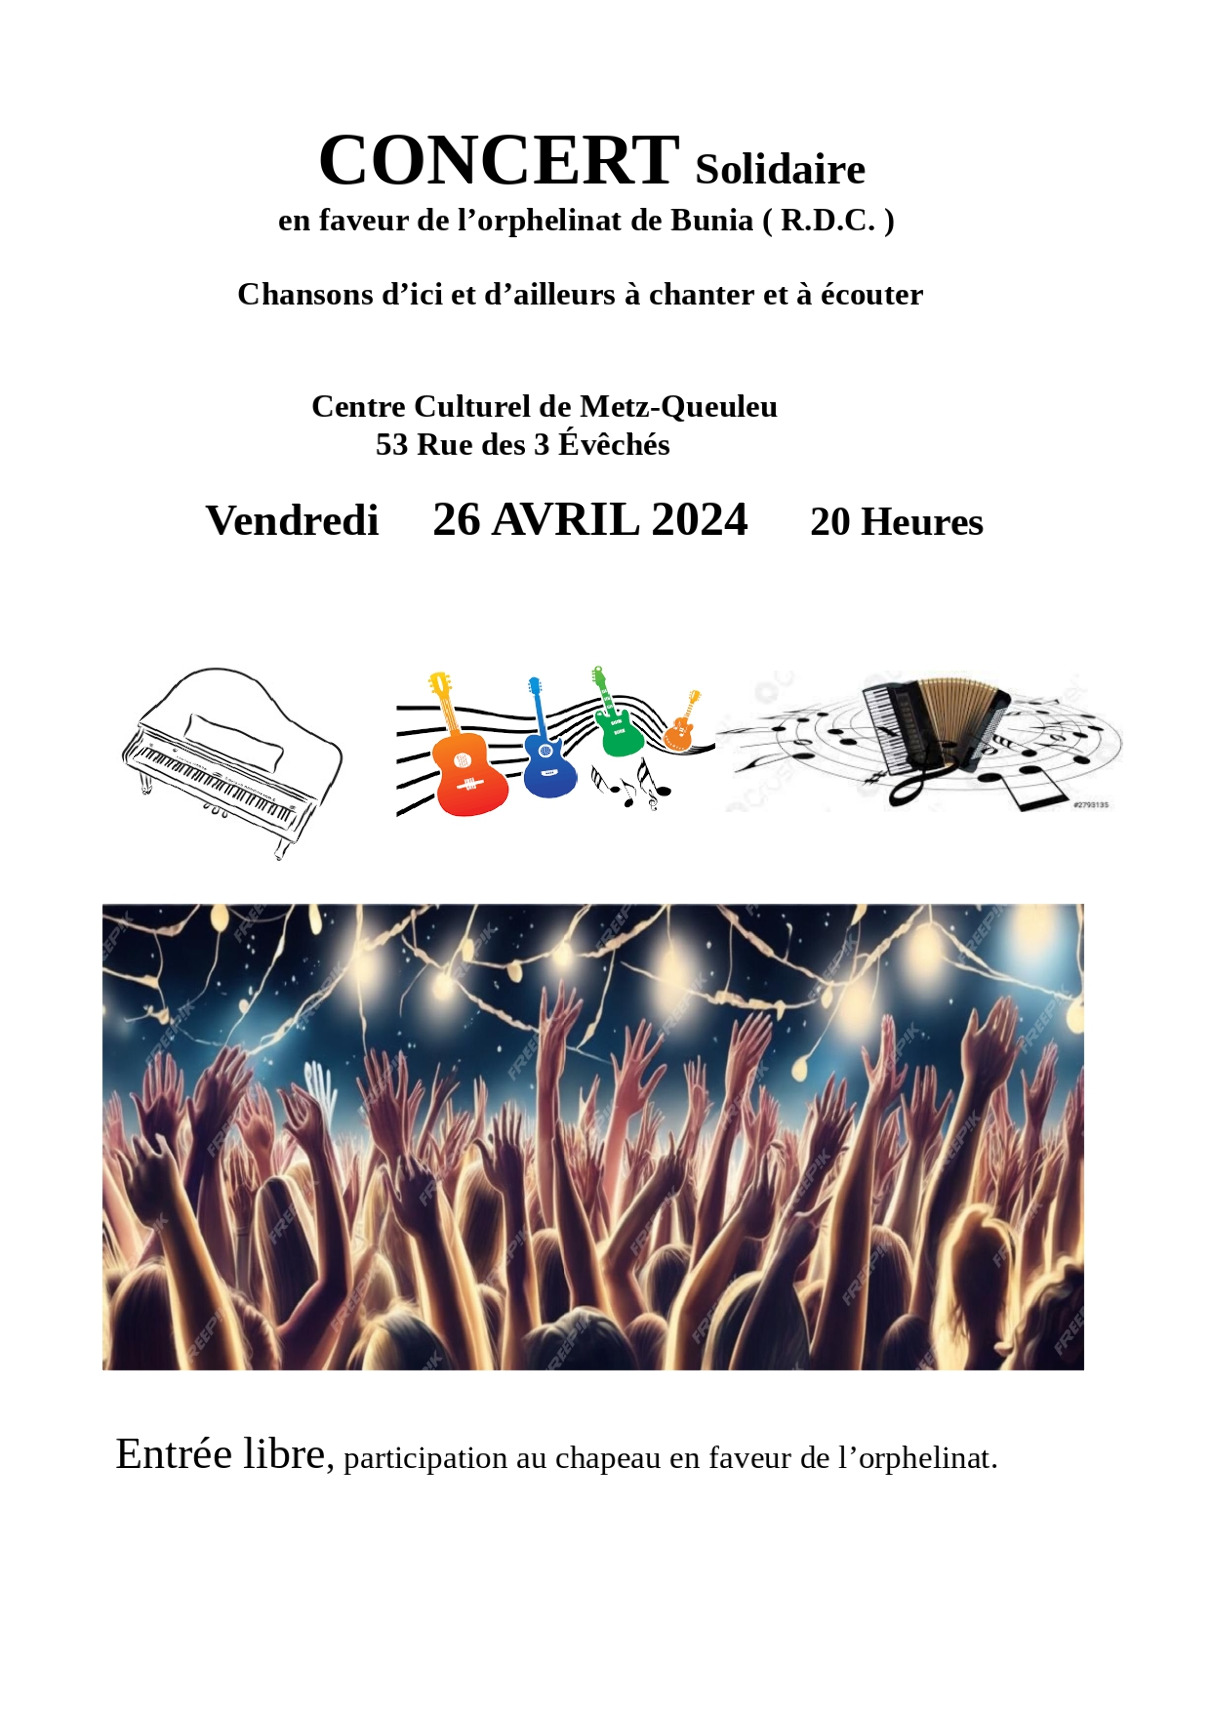 Concert solidaire